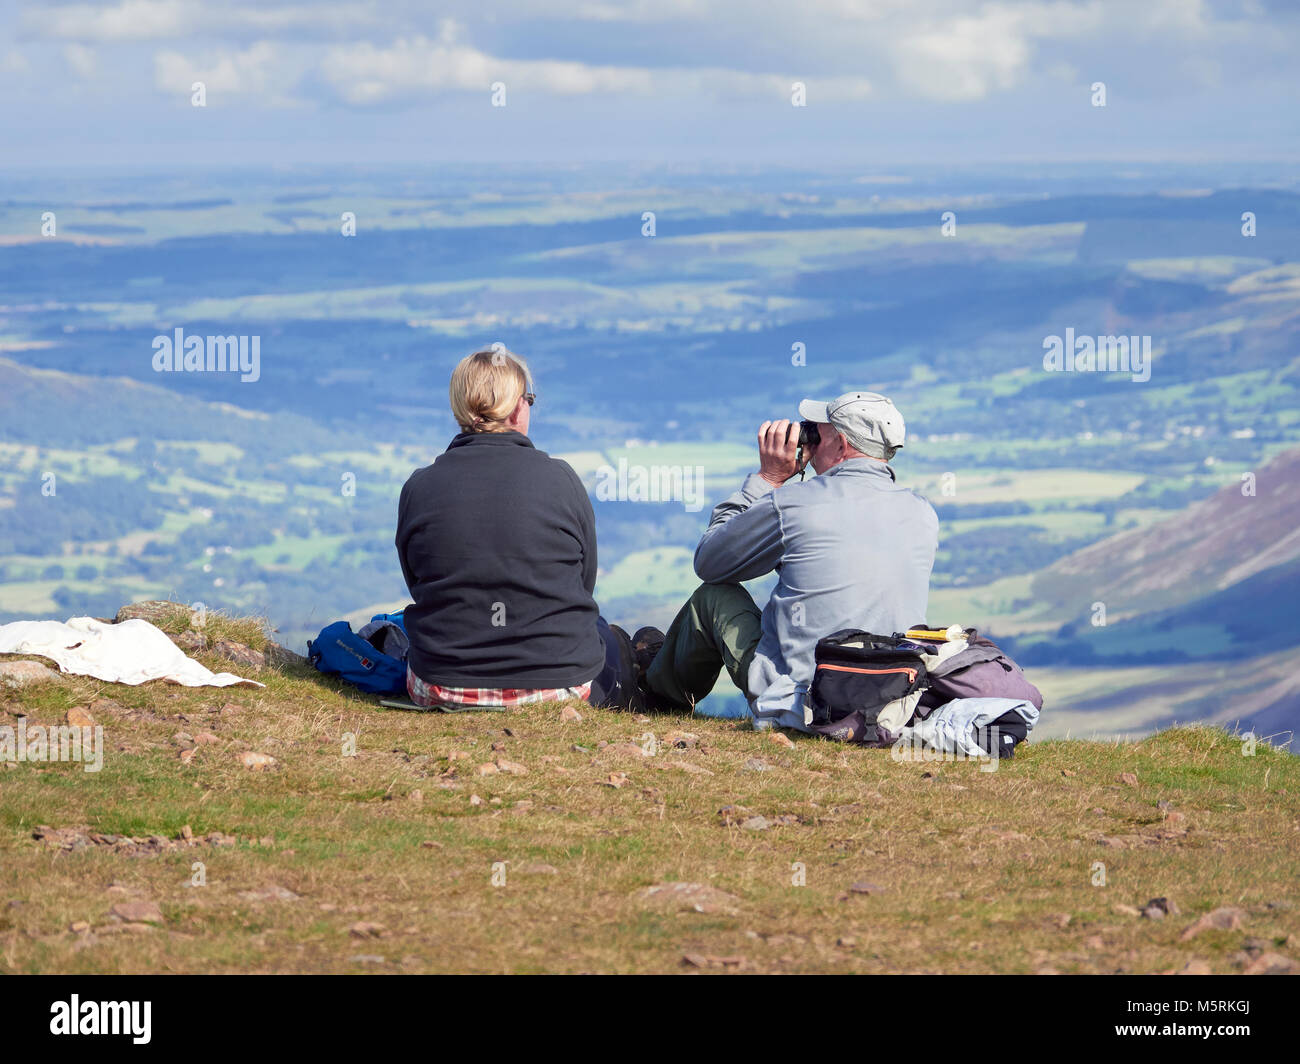 LAKE DISTRICT, CUMBRIA, ENGLAND, UK - SEPTEMBER 02, 2017: A male and female hiker sat down resting on the summit of Red Pike taking in the views over  Stock Photo